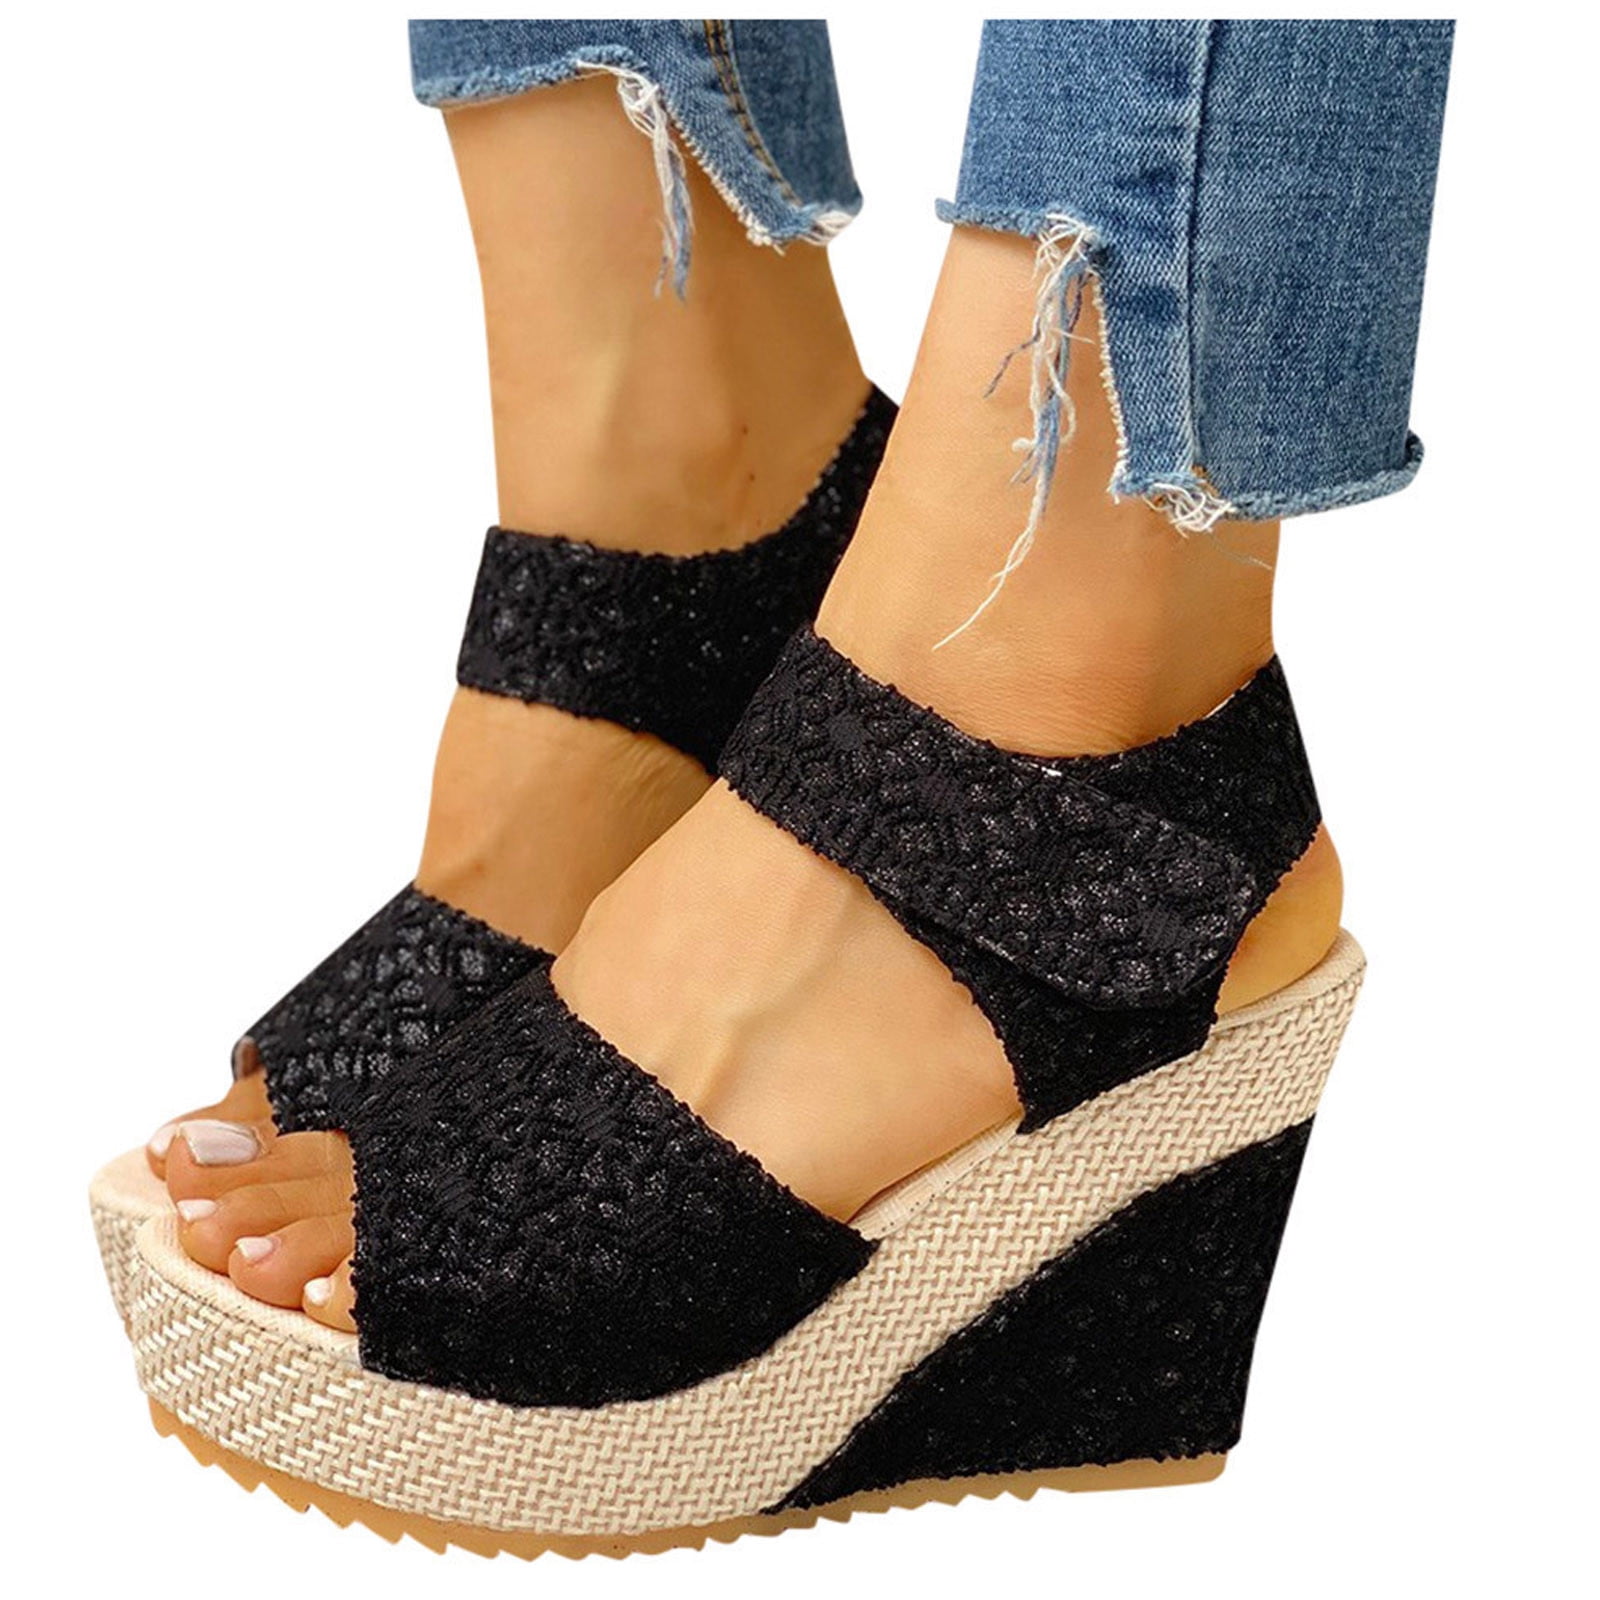 Details about  / Women Summer Casual Ankle Strap Platform Open Toe High Heel Wedge Sandals Shoes